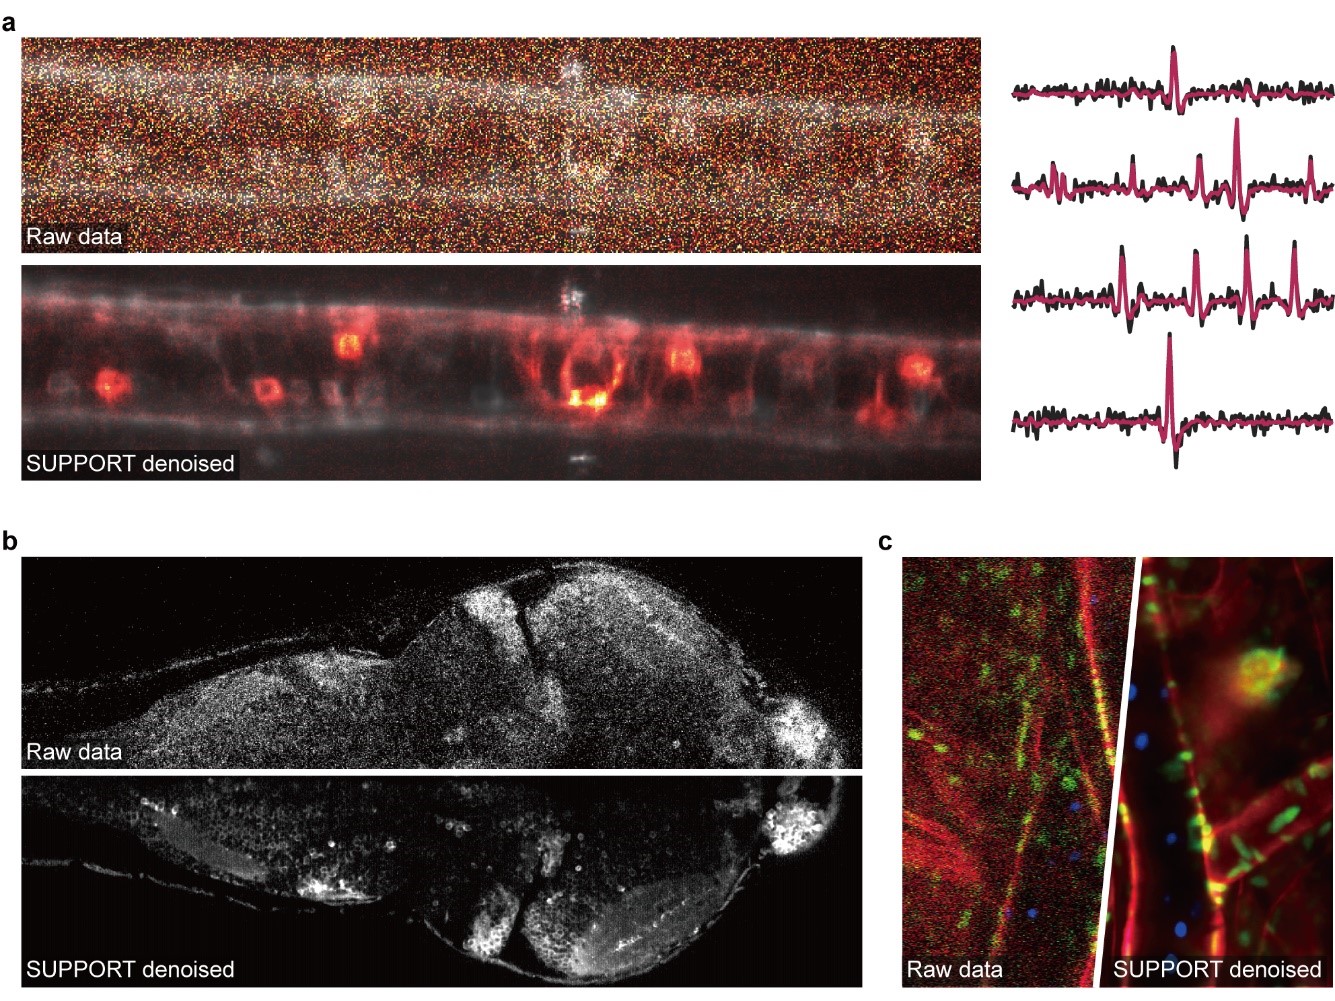 Denoising various images using SUPPORT. (a) Voltage imaging of a zebrafish spinal cord expressing zArchon1. Top-left: Raw data. Bottom-left: SUPPORT-denoised data. Right: Extracted traces from raw (black) and SUPPORT-denoised (red) data. (b) Calcium imaging of a zebrafish whole brain expressing GCaMP7a. (c) Intravital imaging of mouse ear skin.